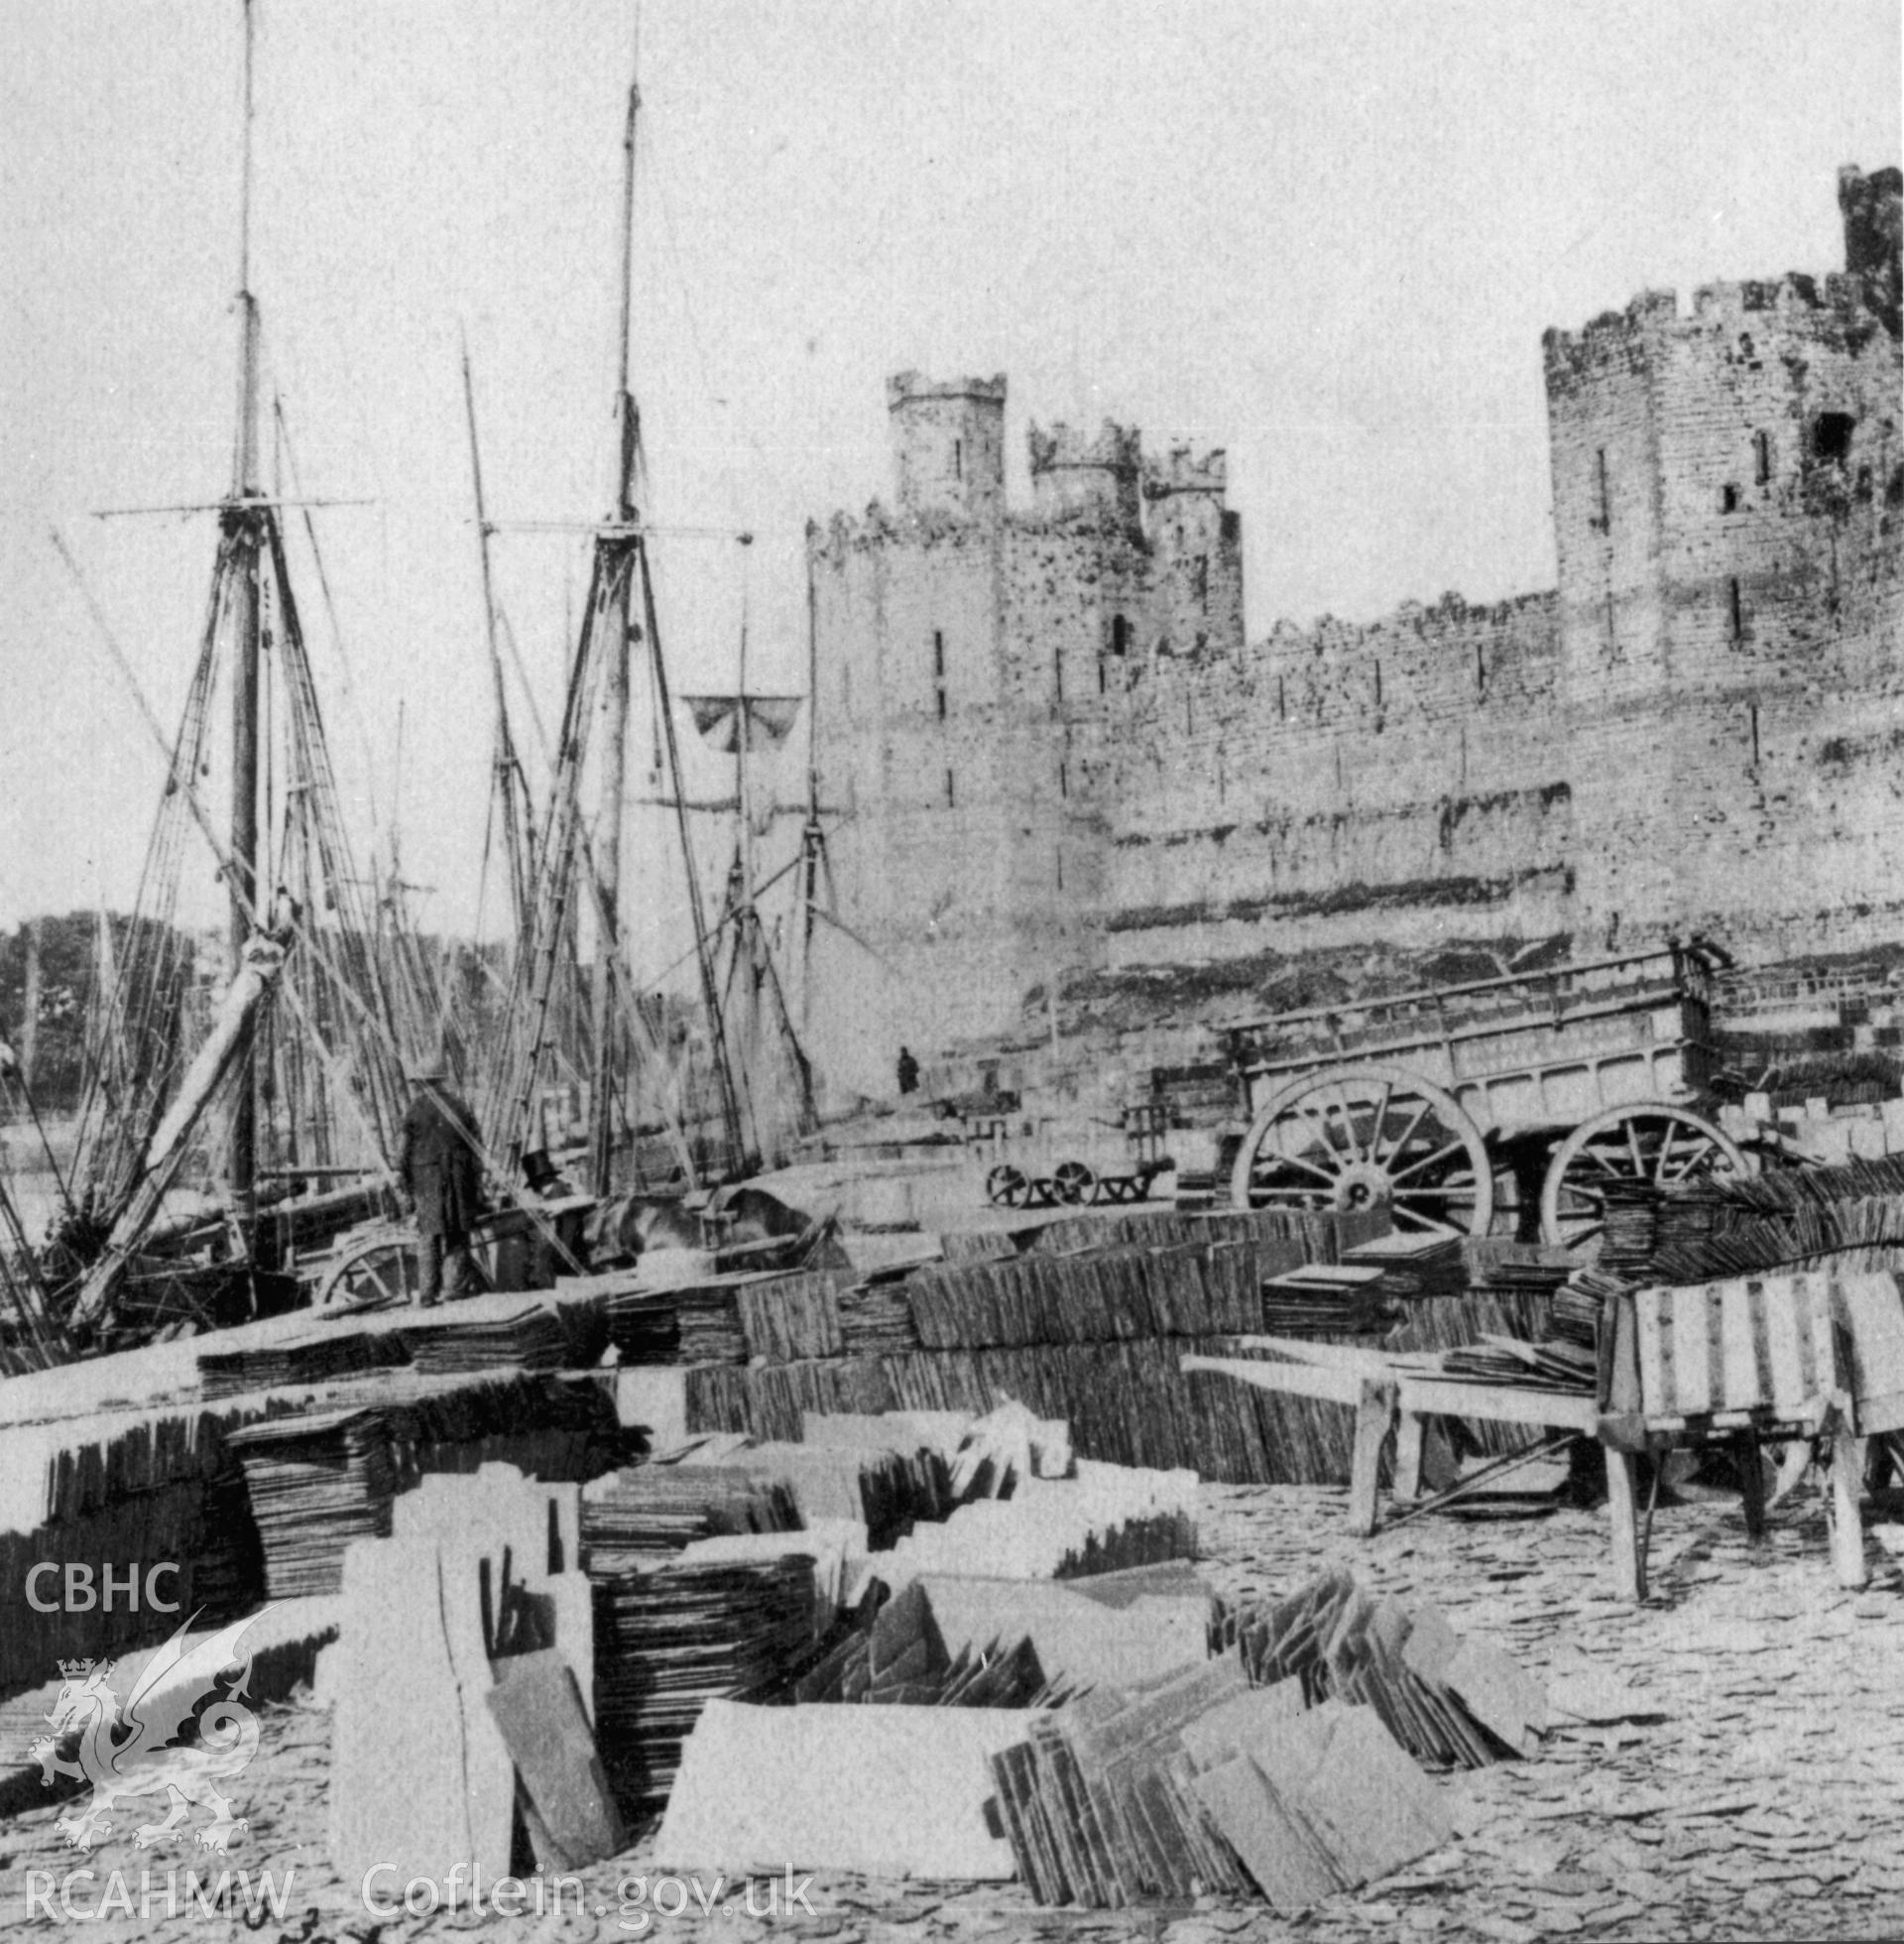 Caernarfon Castle; photograph showing the castle and harbour with slate piles in the foreground.